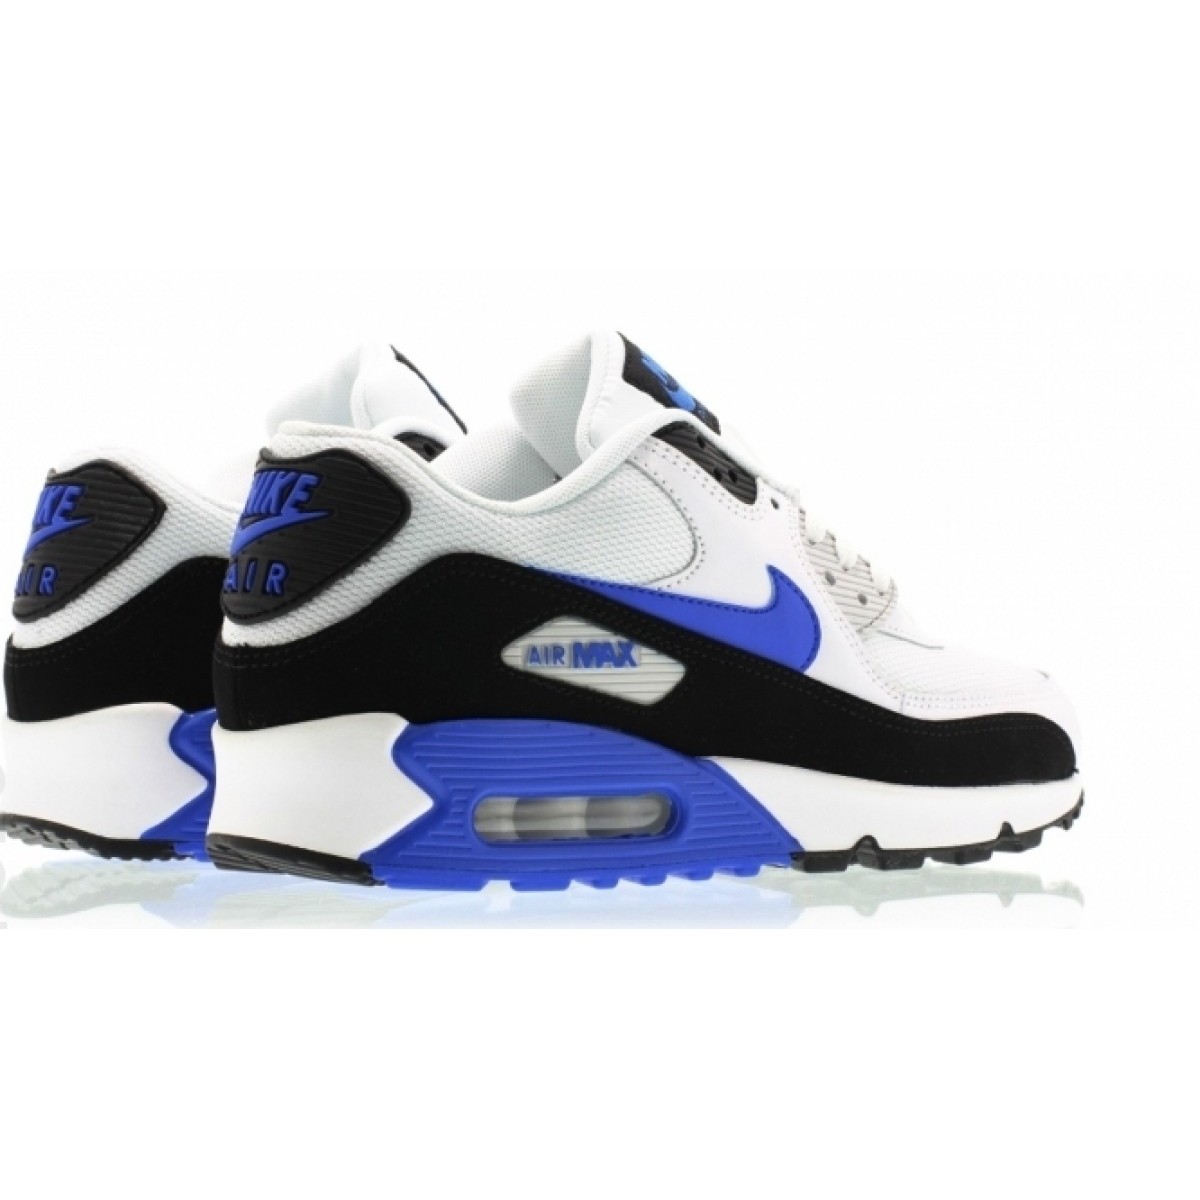 nike air max 90 soldes, OFF 74%,Cheap price !